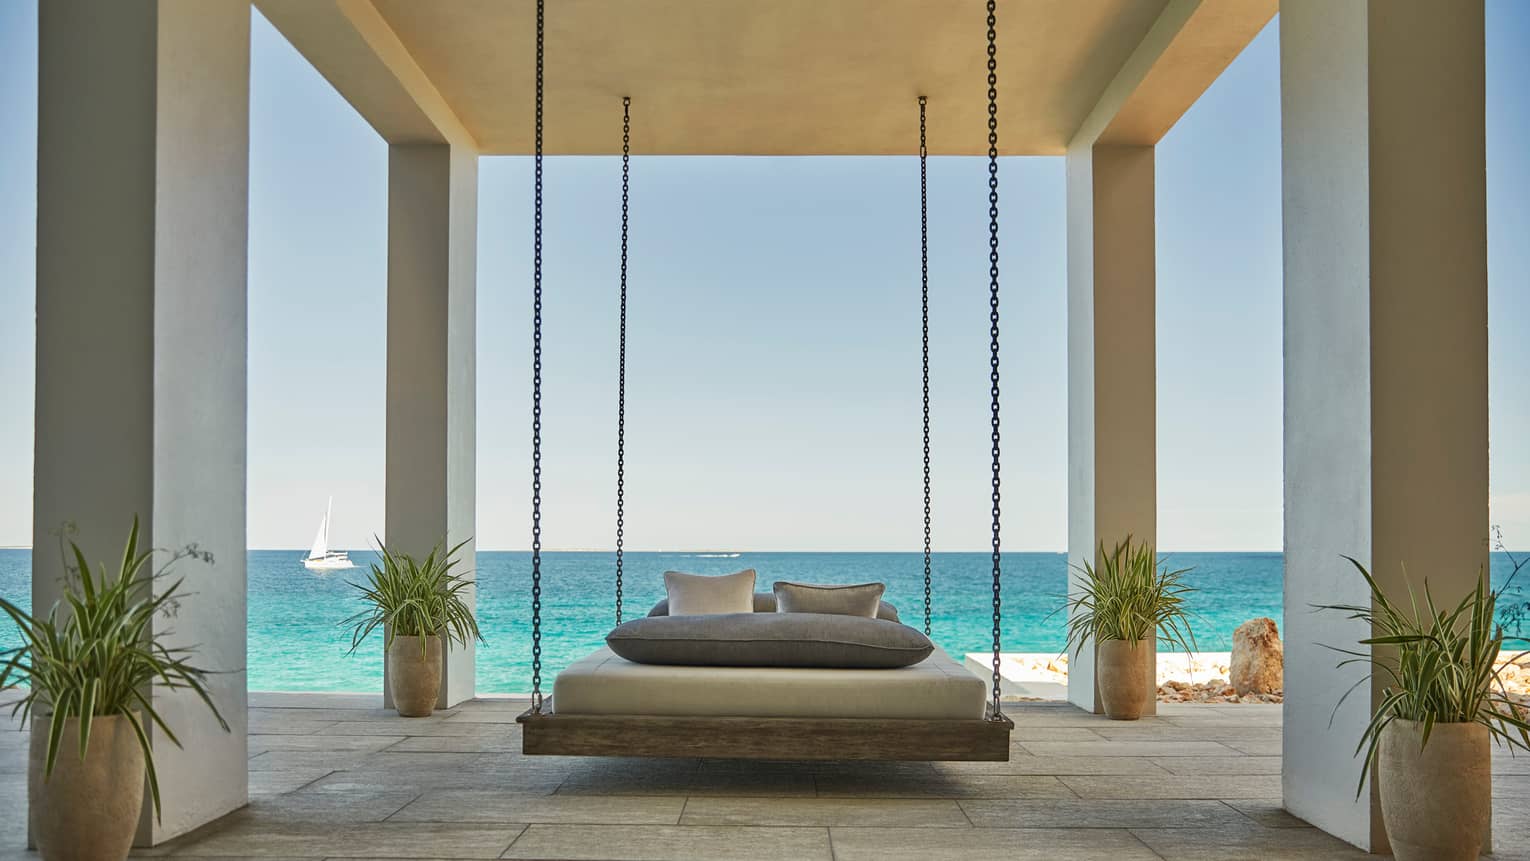 Patio bed hangs by chains from white ceiling in outdoor room with tropical potted plants, ocean view